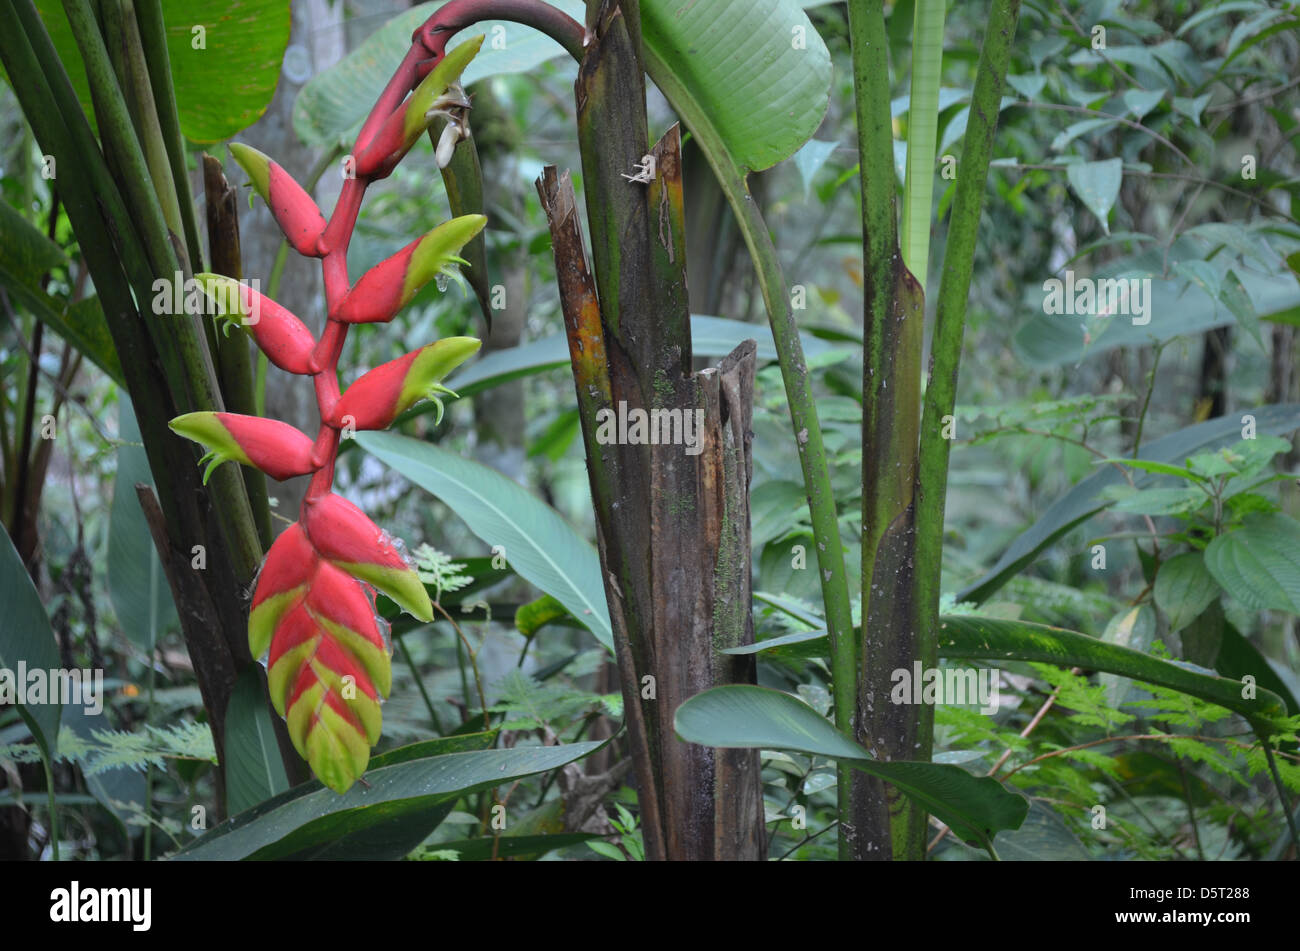 Heliconia Plants growing in the Amazon rainforest near Iquitos, Peru Stock Photo